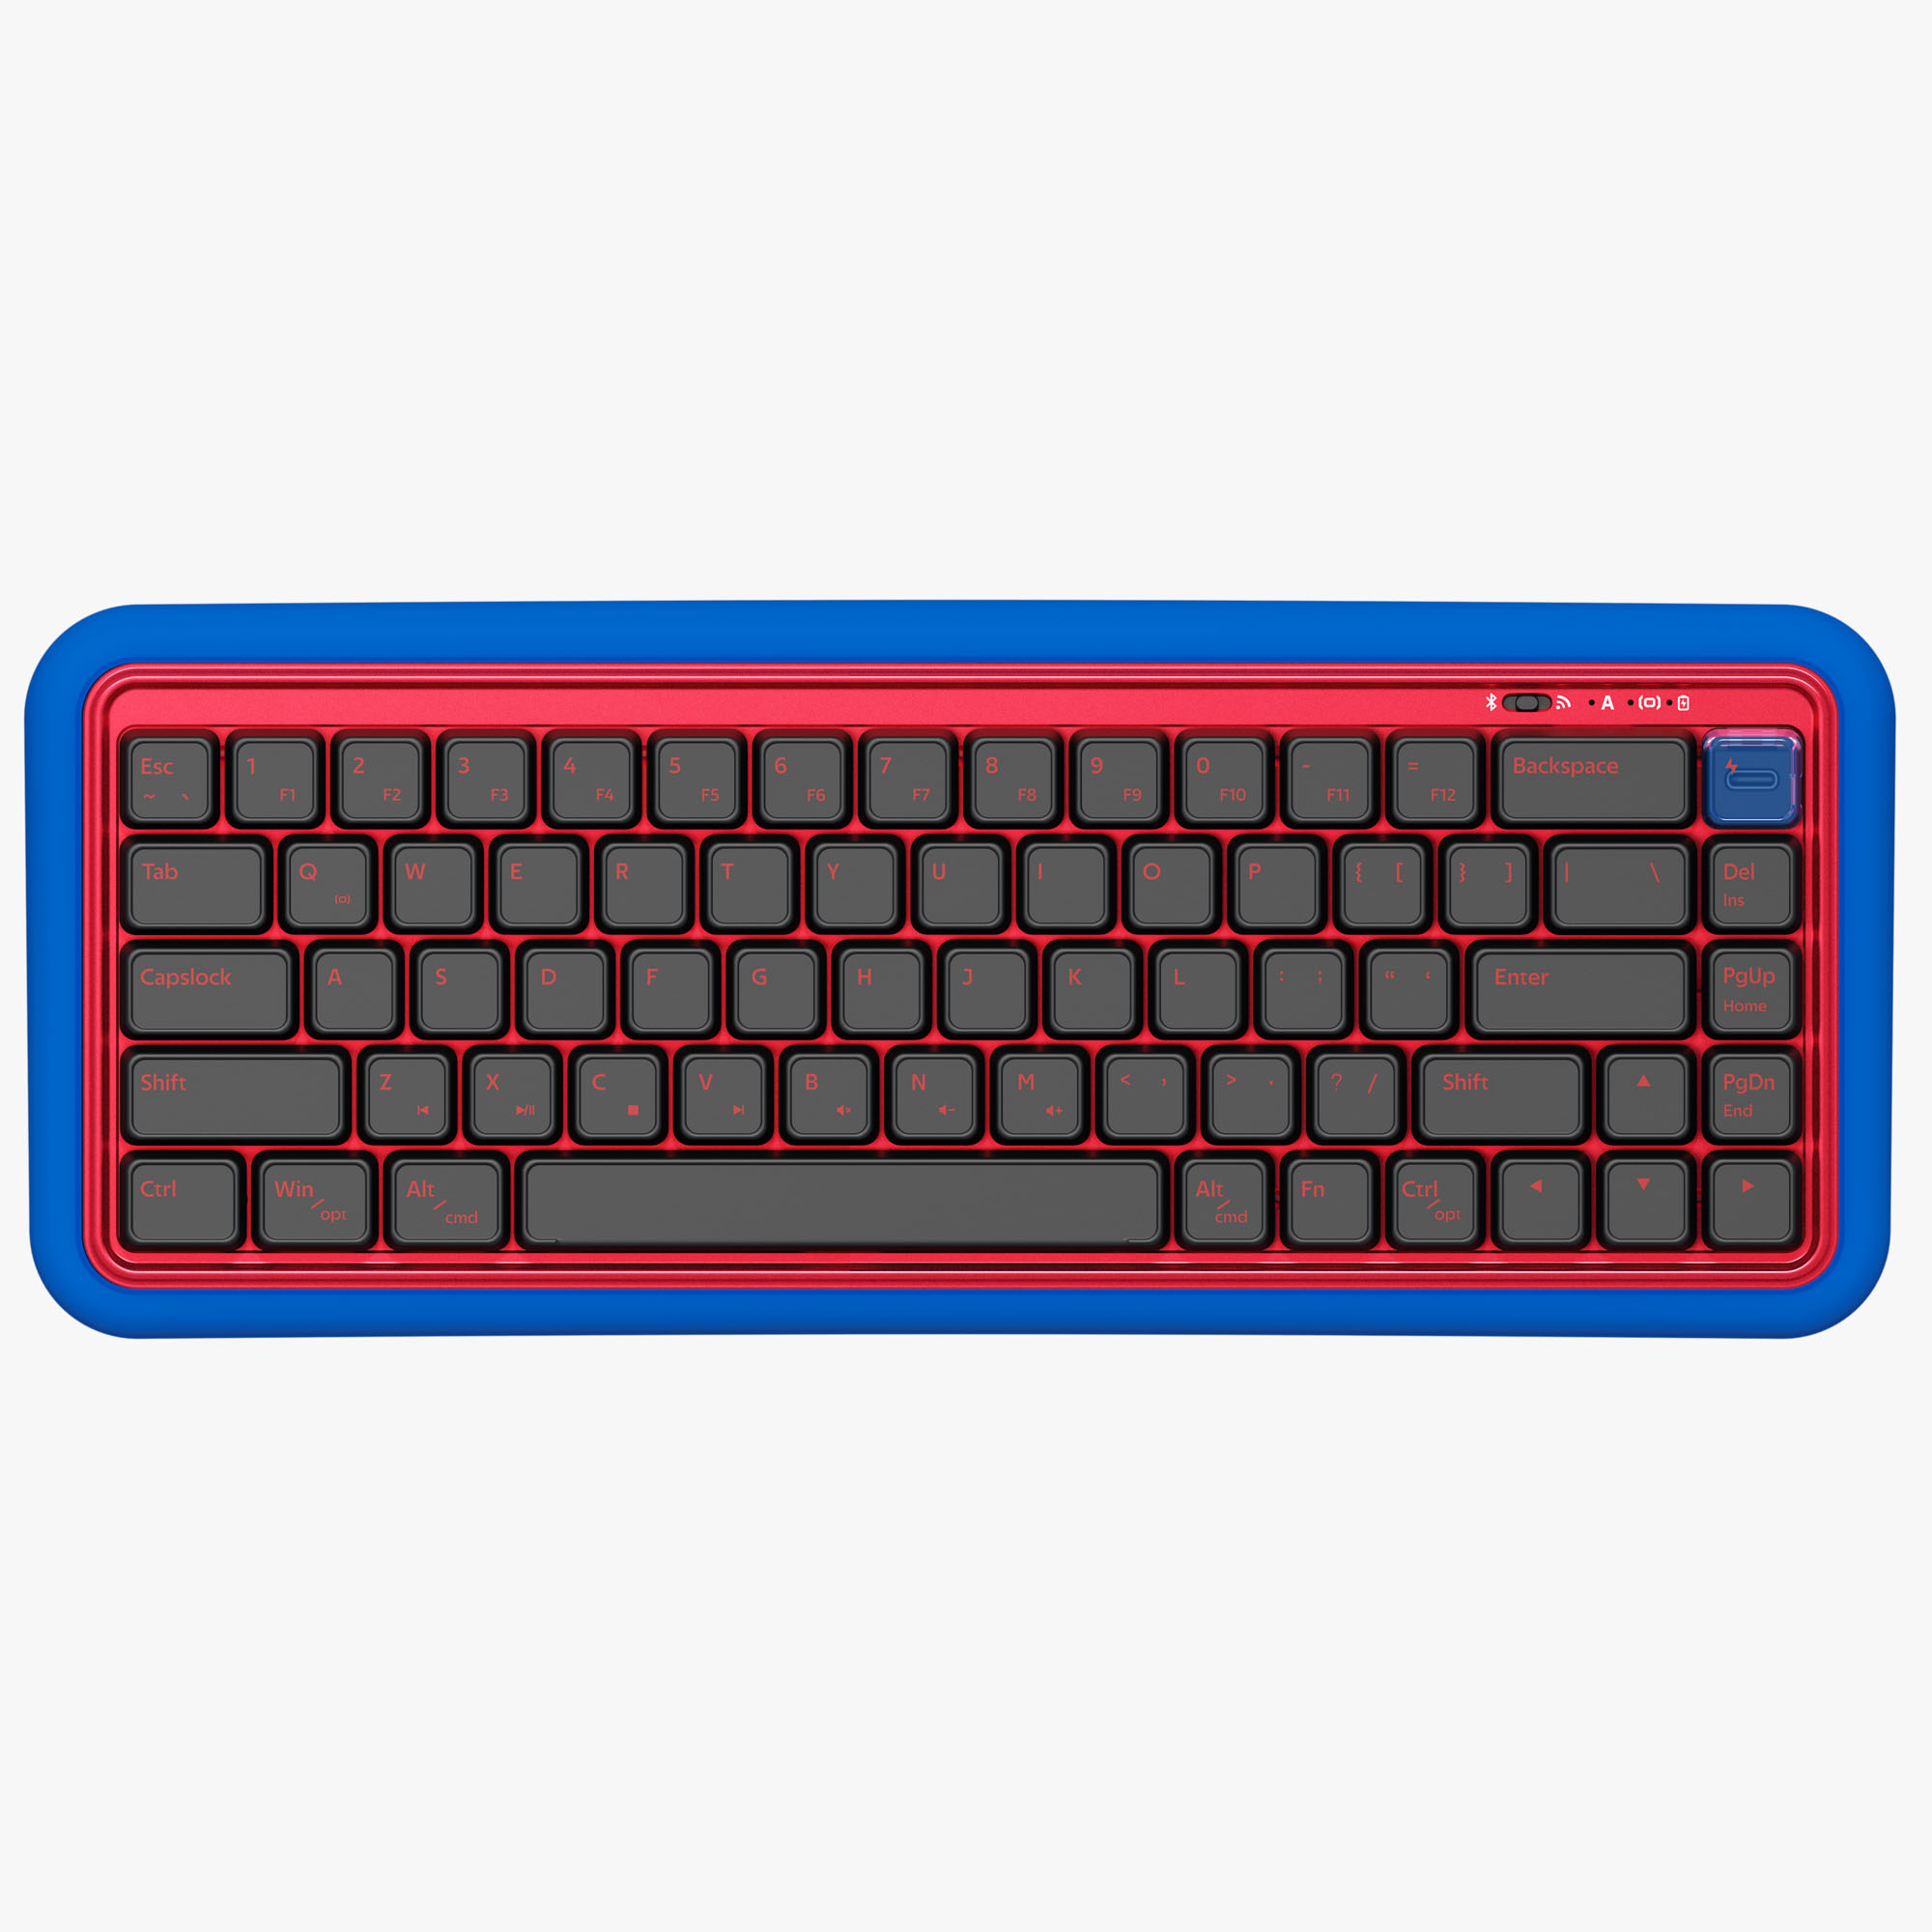 DURGOD S230 | BLACK AND RED MECHANICAL KEYBOARD